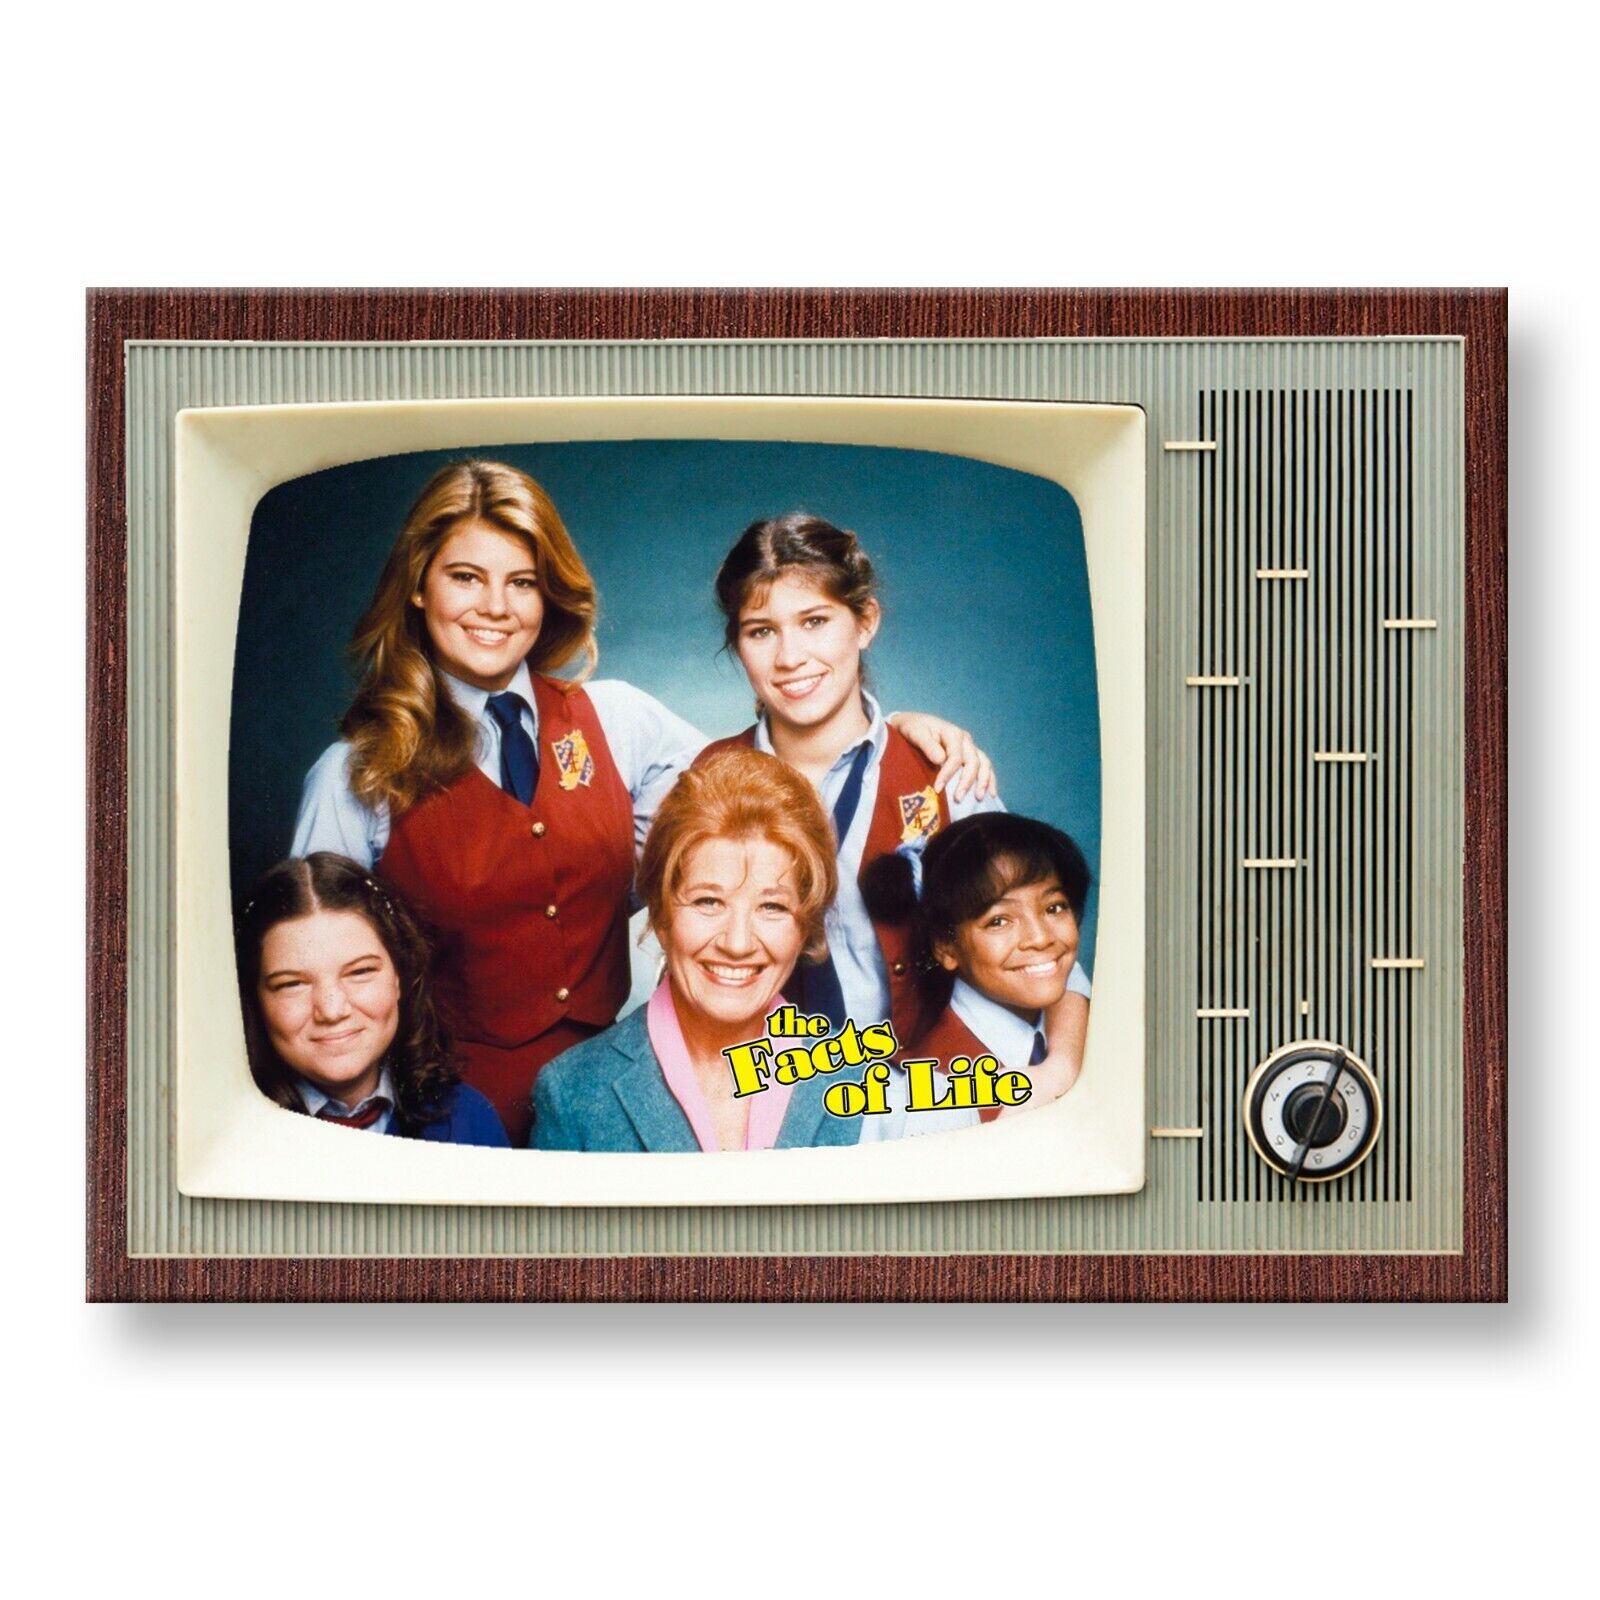 FACTS OF LIFE TV Show TV 3.5 inches x 2.5 inches Steel FRIDGE MAGNET